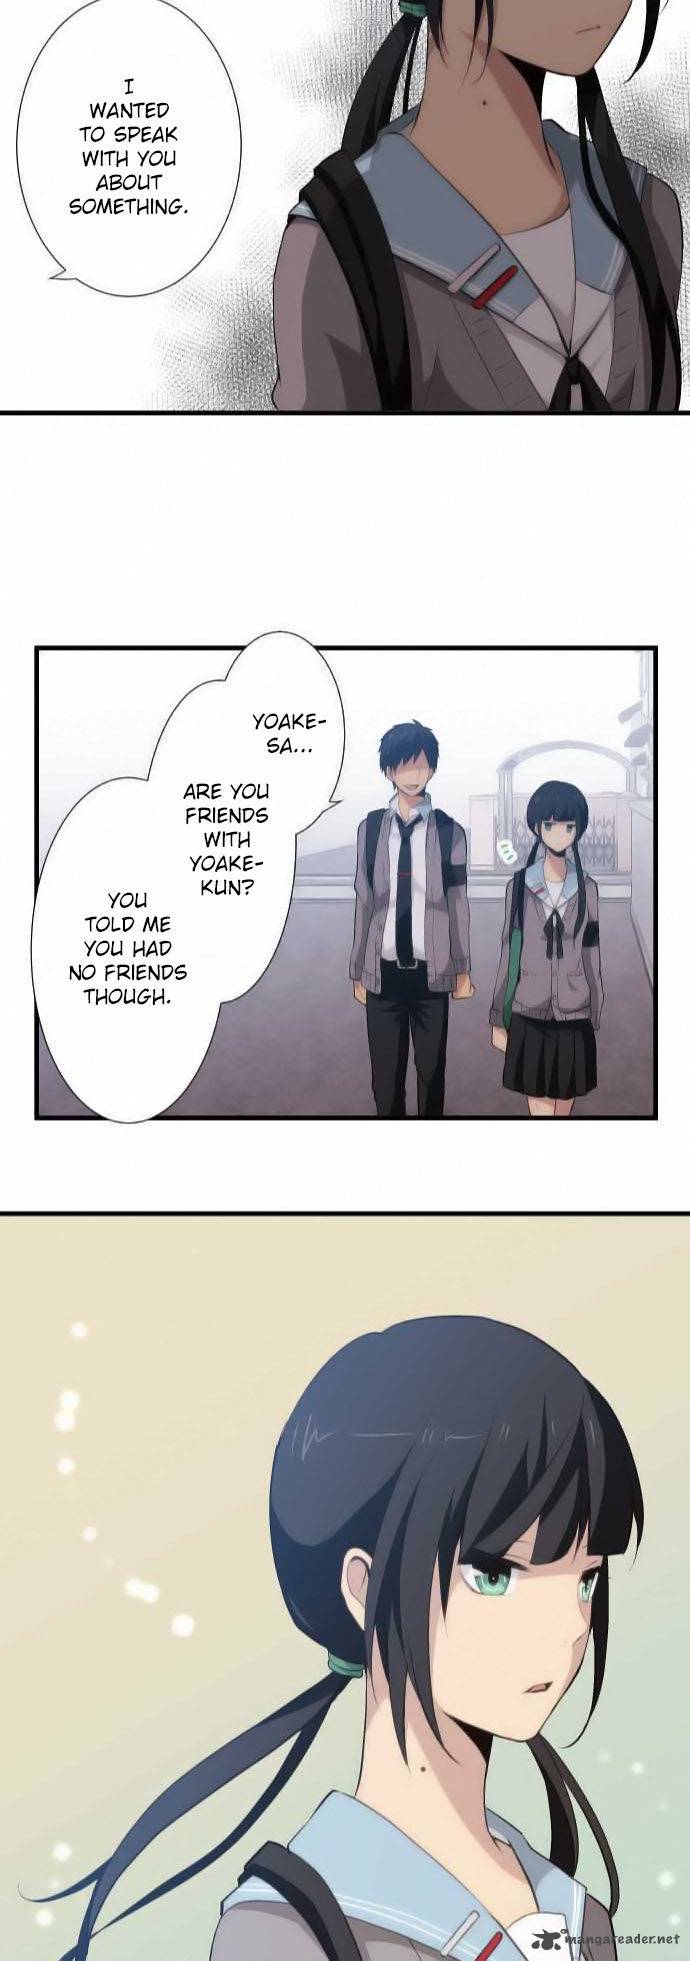 Relife 55 23